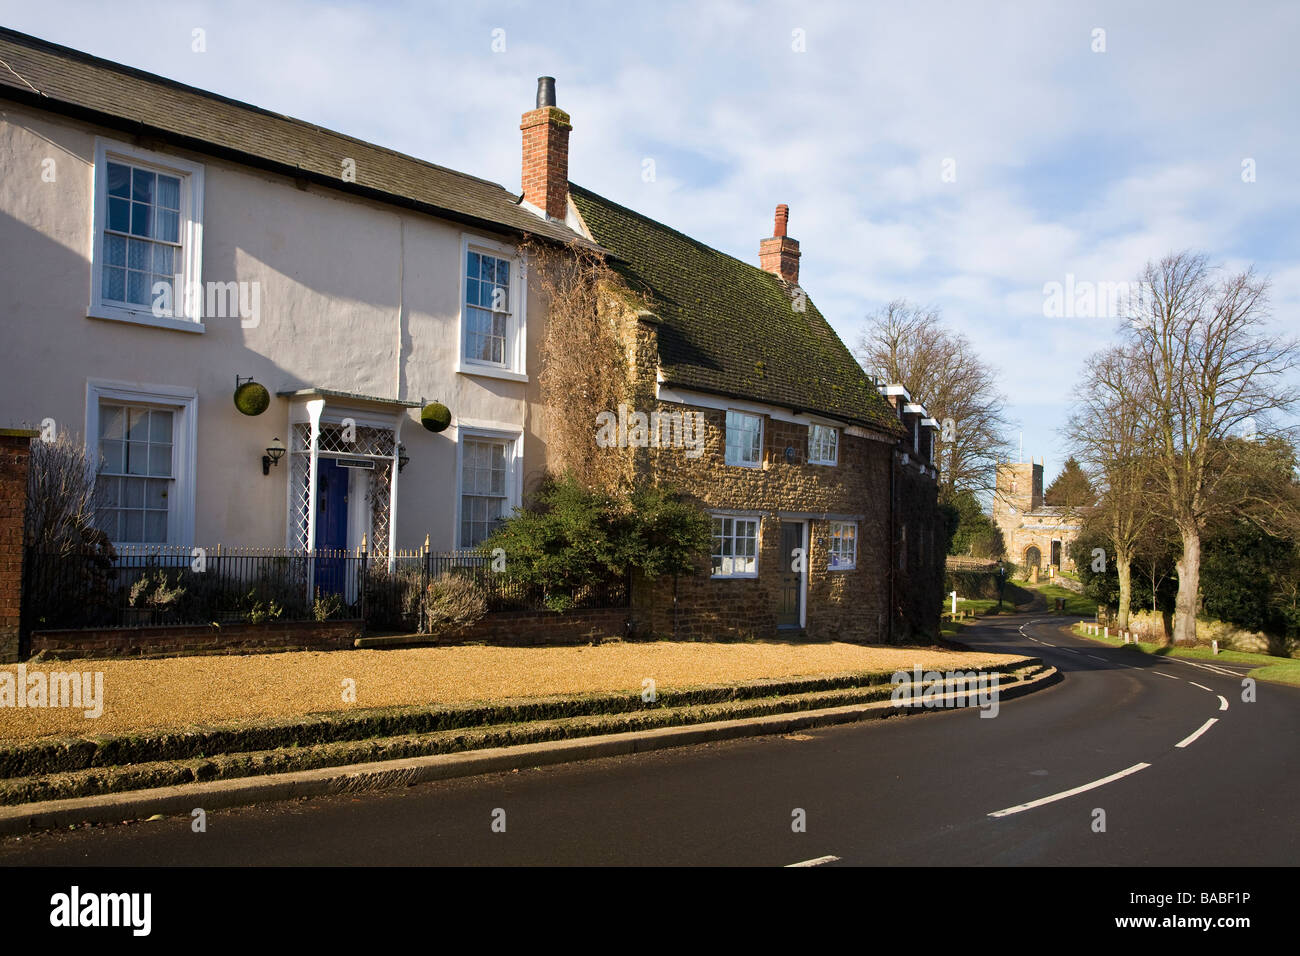 Main street with cottages and village church Scaldwell Northamptonshire England UK GB Stock Photo